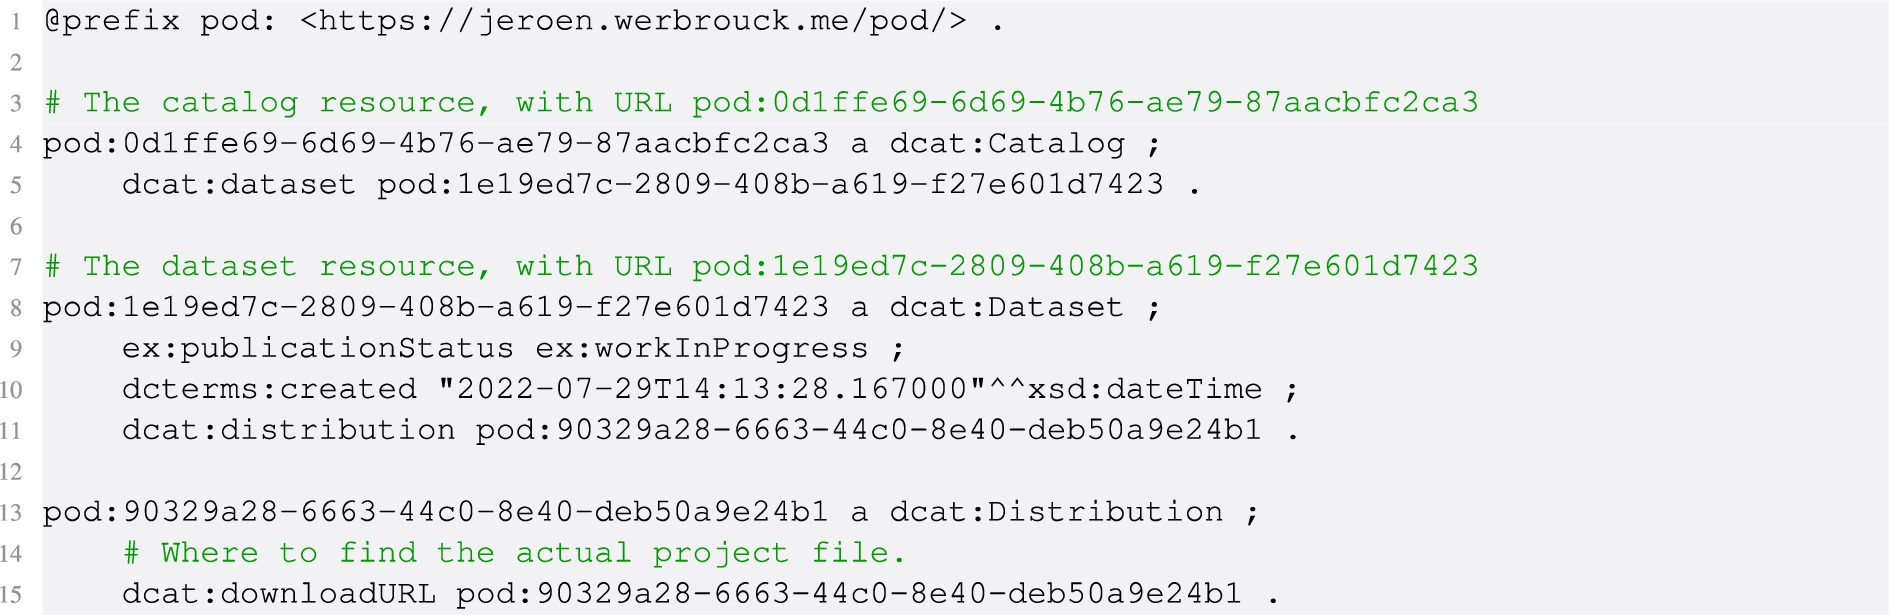 Catalog and metadata record of a resource, using the DCAT vocabulary. Both the catalog and the dataset are accessible as an HTTP resource and as a named graph in the SPARQL satellite. An example vocabulary is used to denote the publication statuses